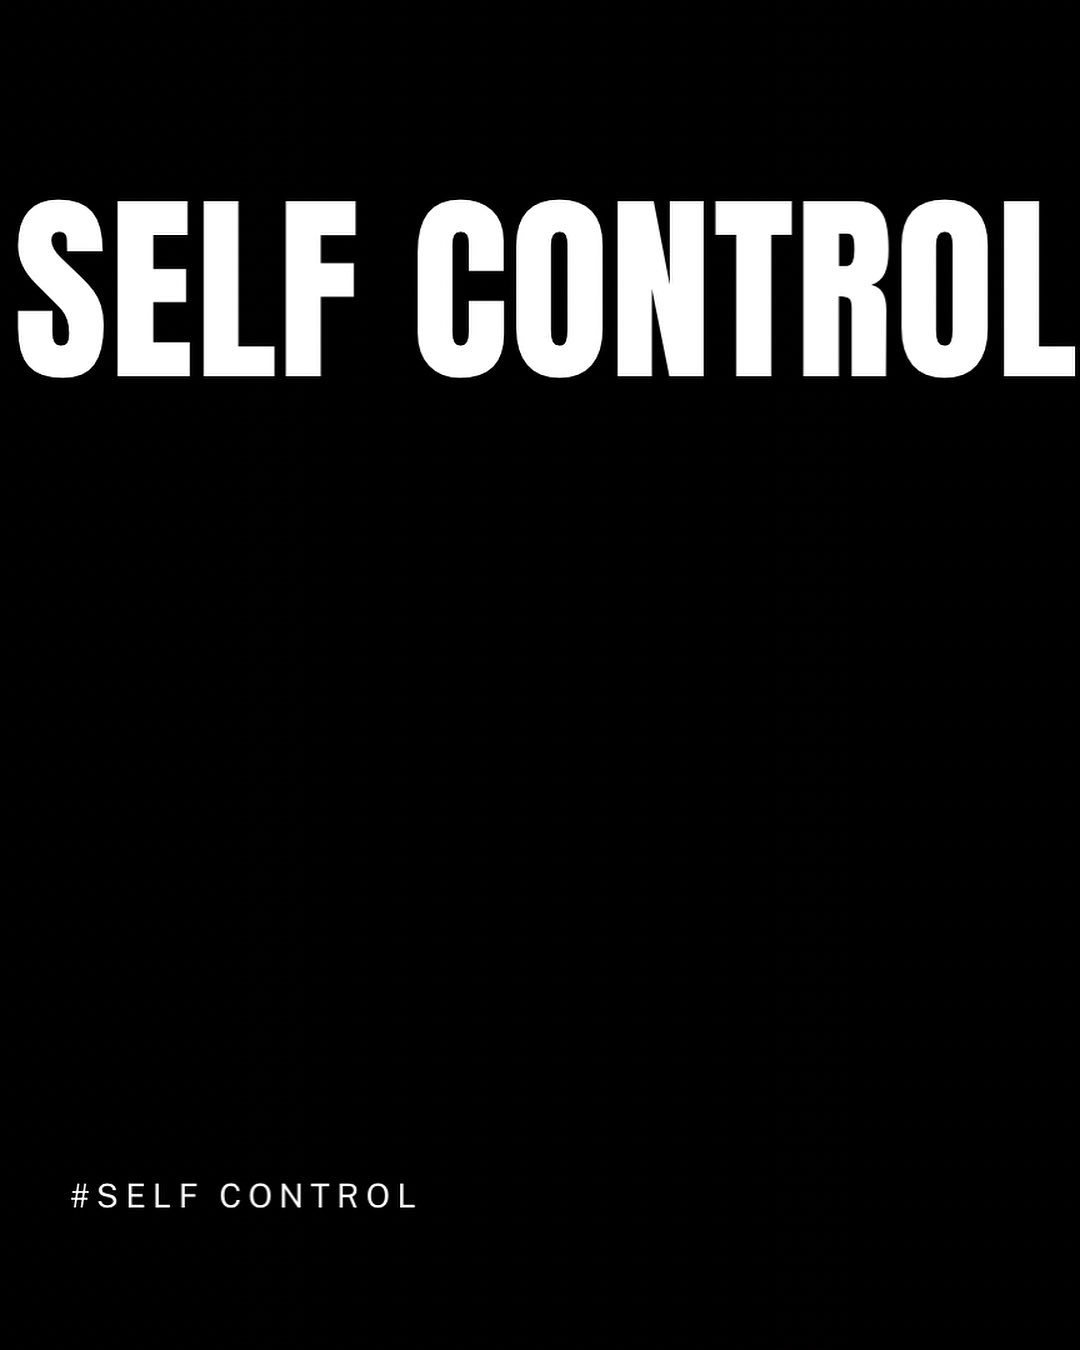 Self-control is the cornerstone of greatness. 🥋💫 It&rsquo;s not just about mastering kicks and punches; it&rsquo;s about mastering yourself &ndash; your impulses, your reactions, your inner strength. In Taekwon-Do, discipline and self-control form 